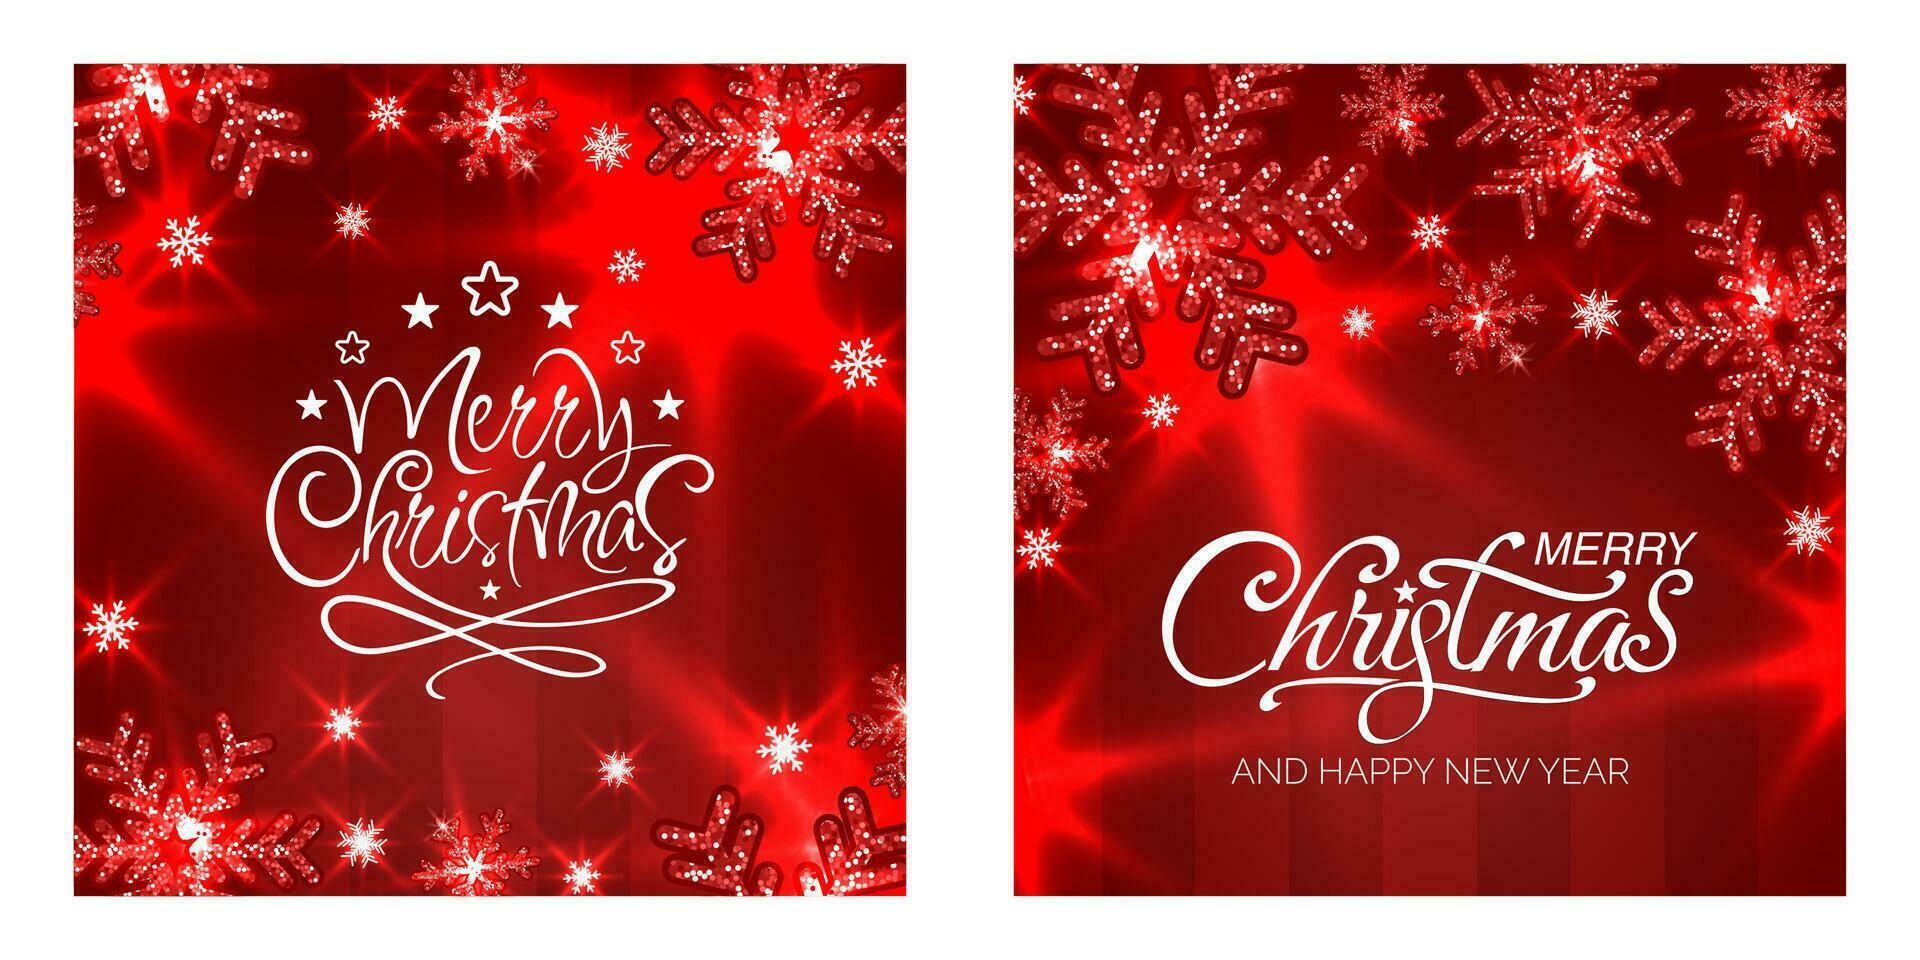 Merry Christmas  Happy New Year greeting with snowflakes and bokeh. For sale, banner, posters, cover design templates, social media wallpaper stories vector